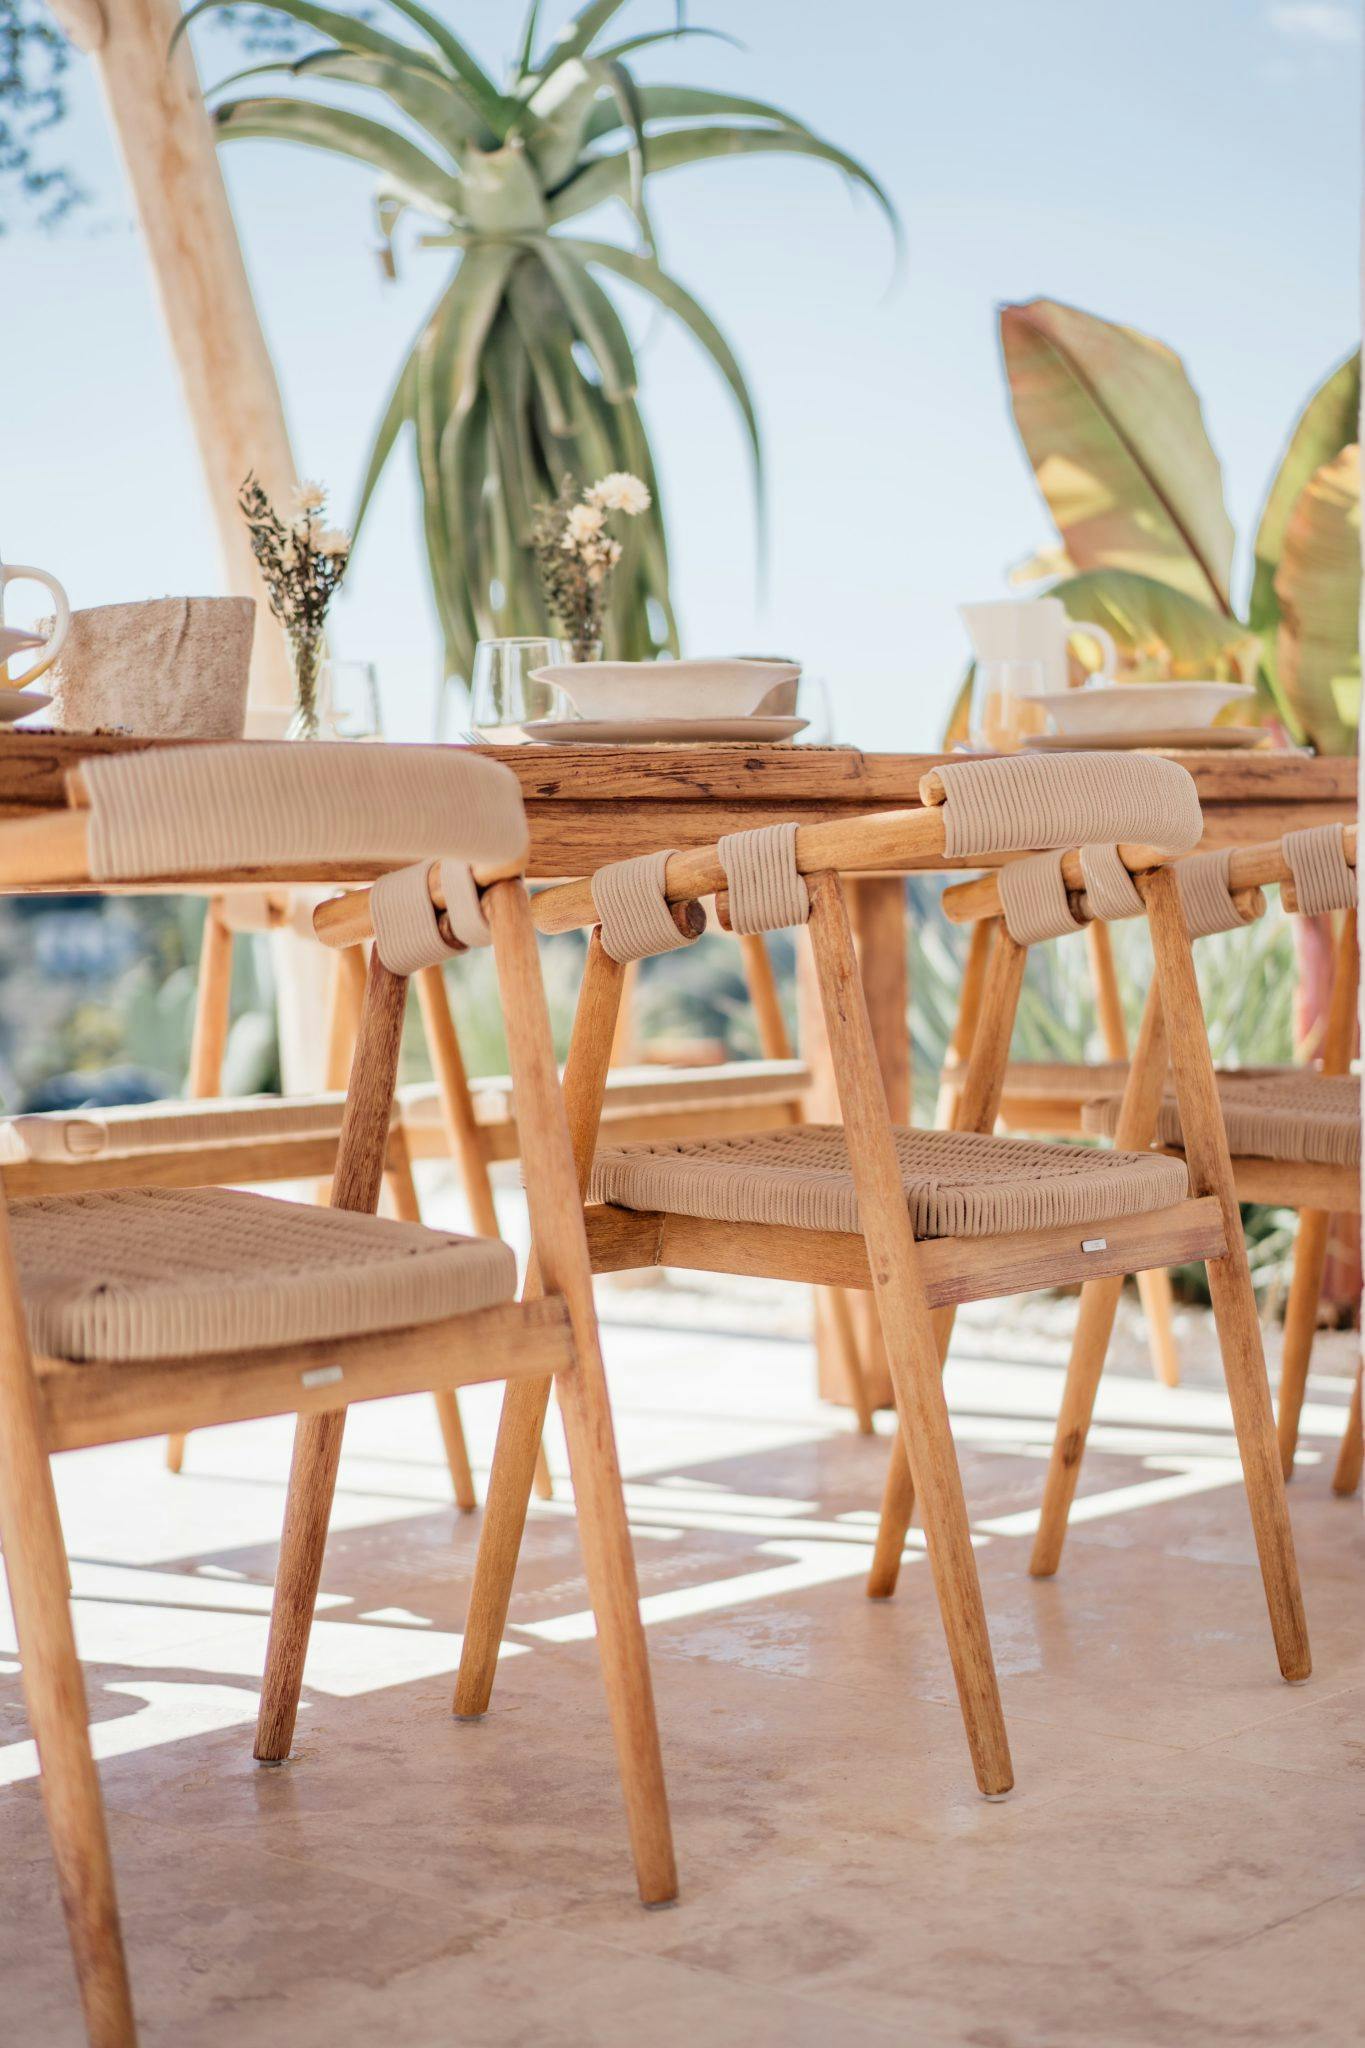 Focus on the chairs of the outdoor dining table